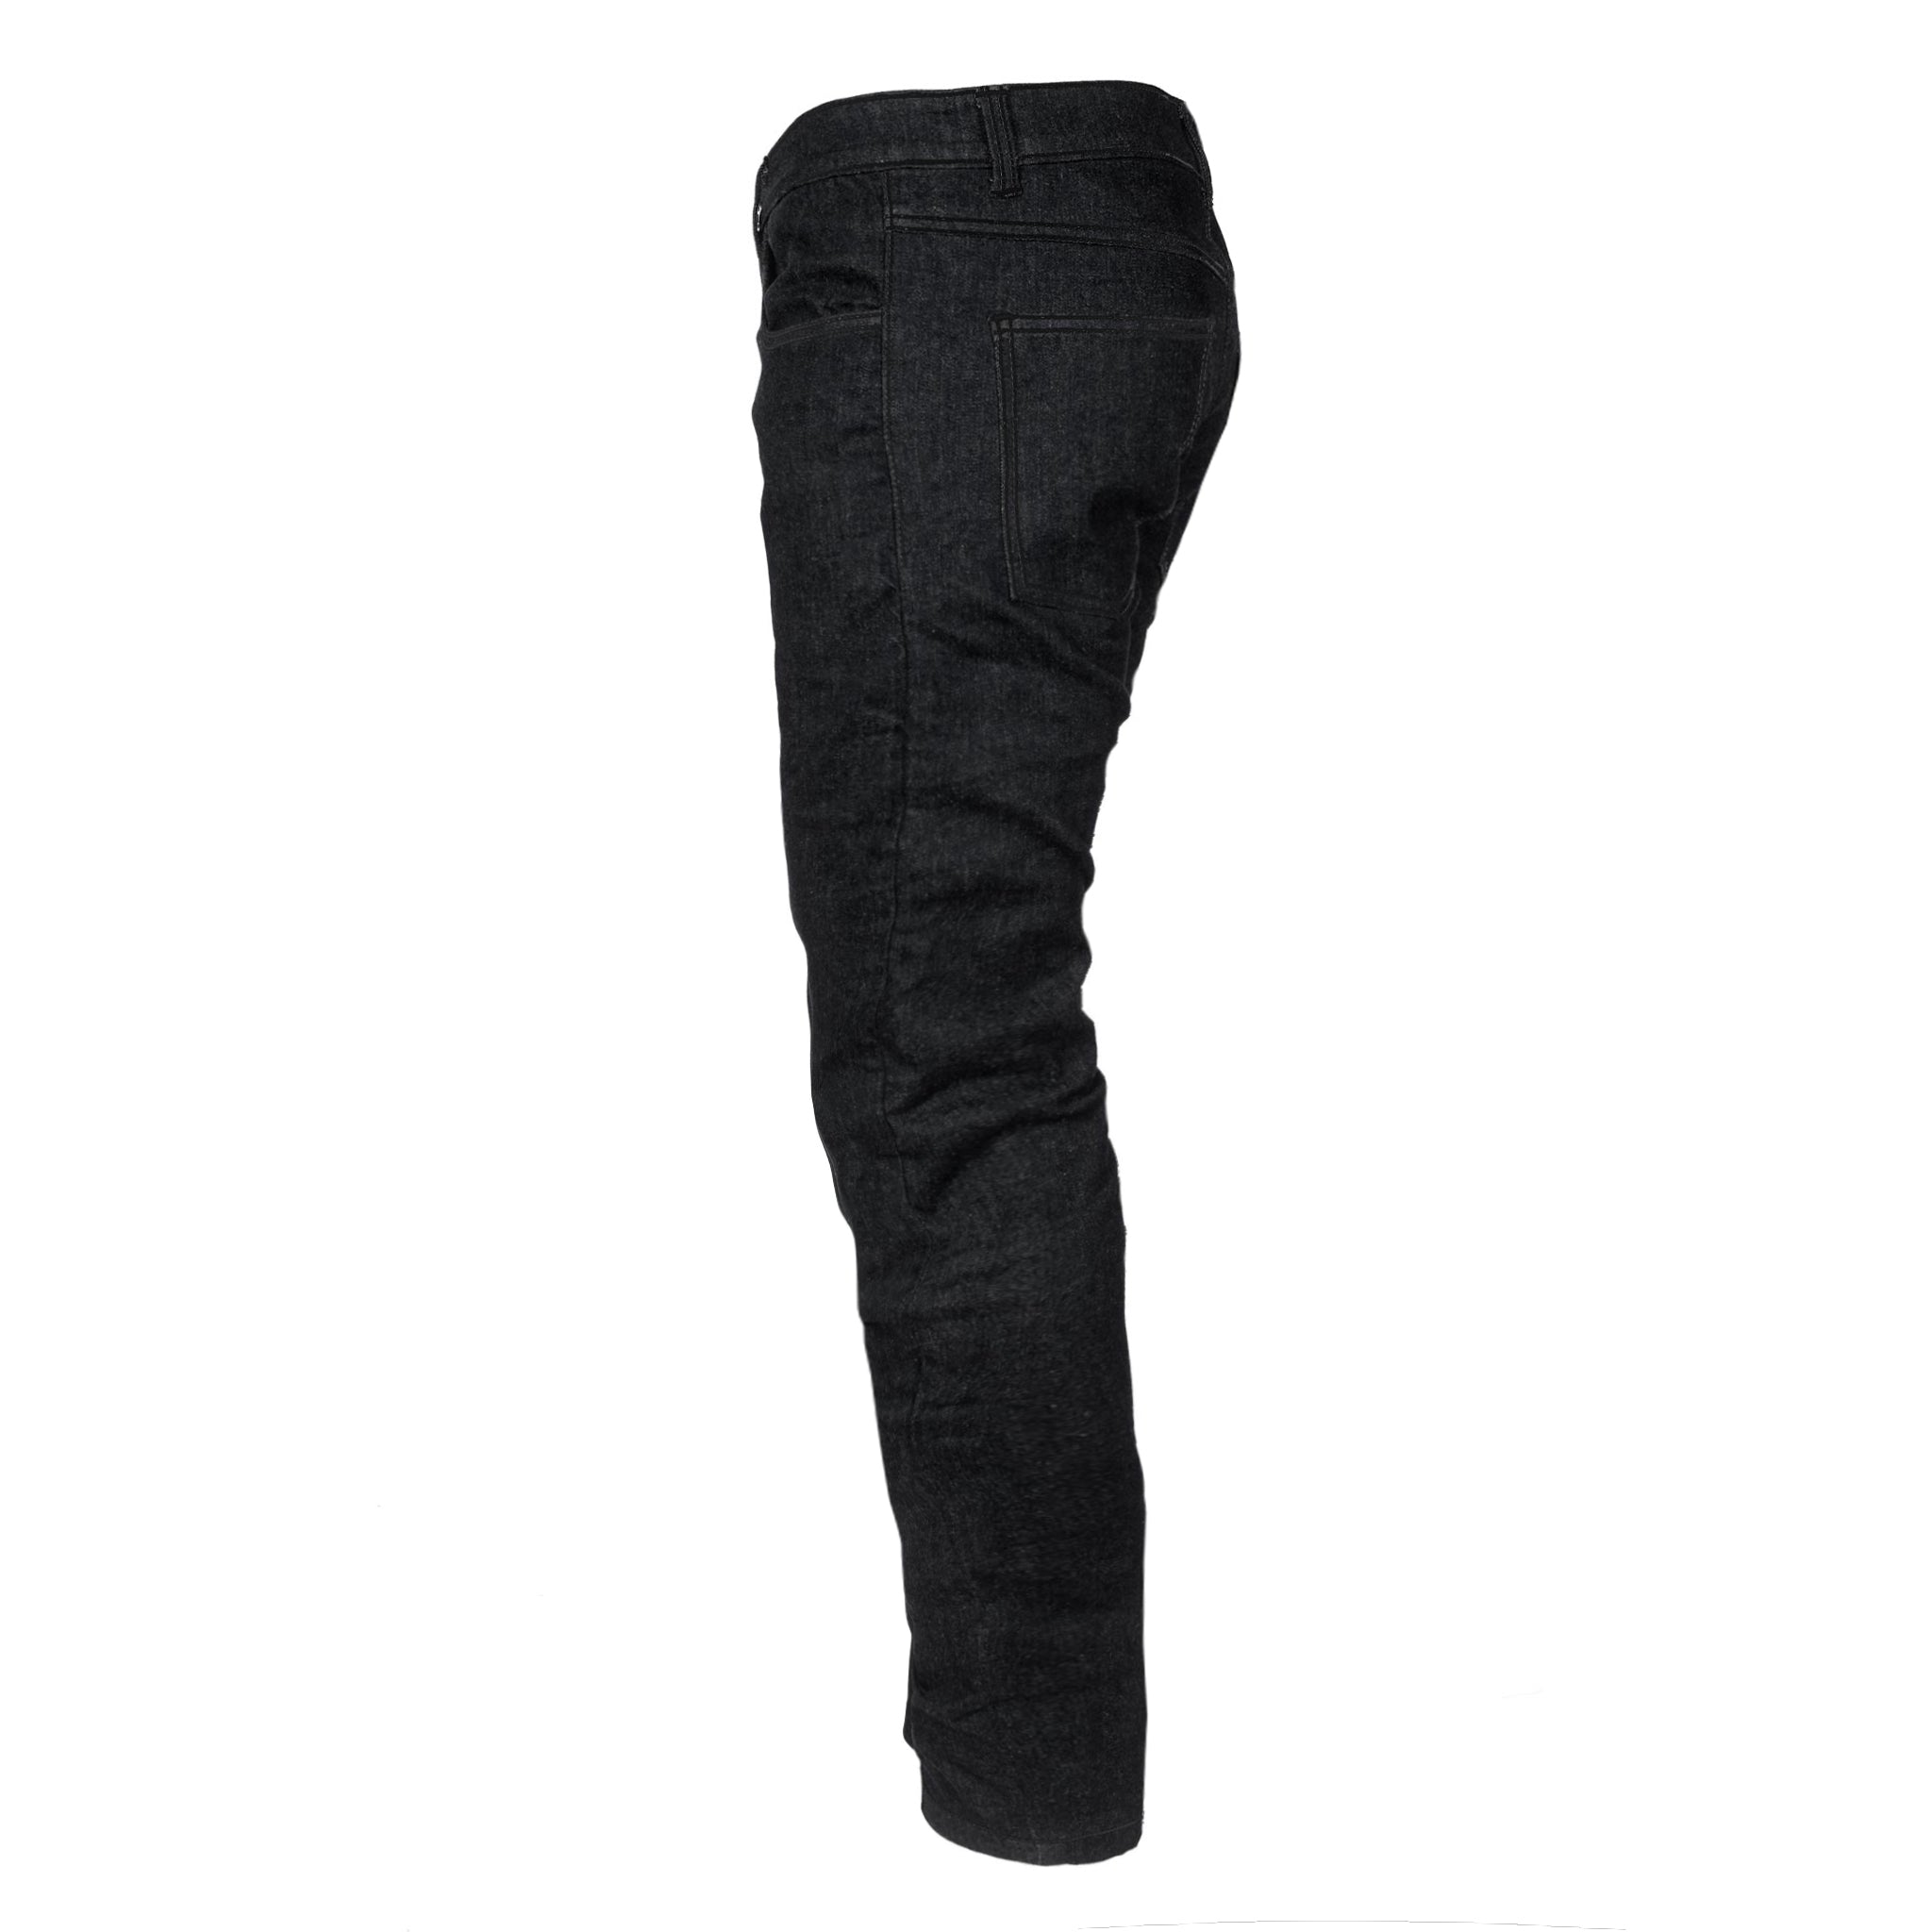 SALE Relaxed Fit Protective Jeans - Black with Pads